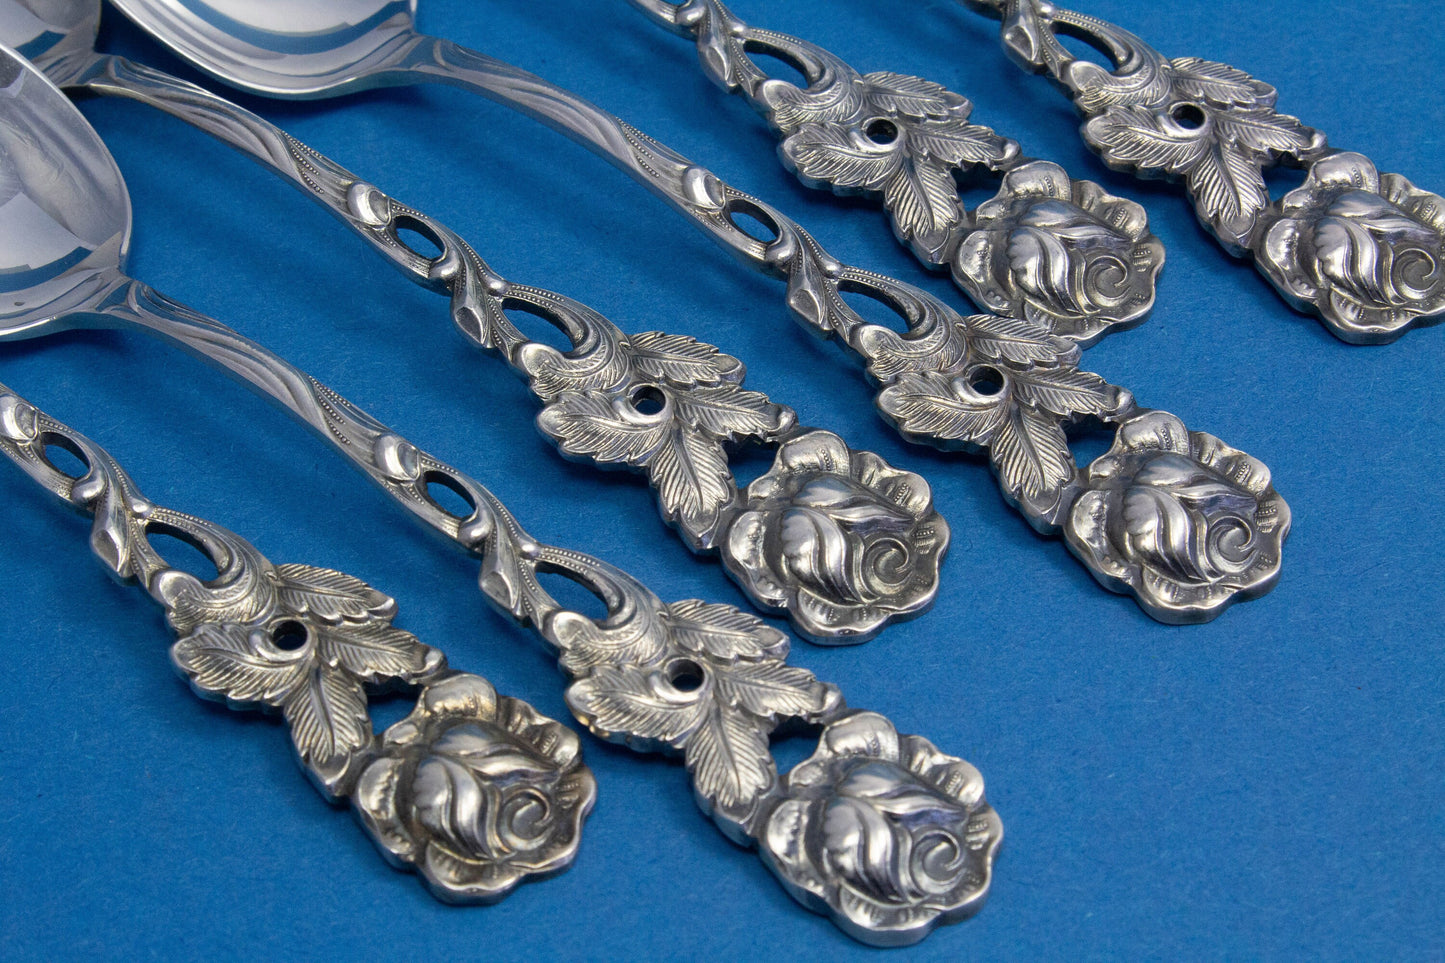 6 mocha spoons with roses, silver plated